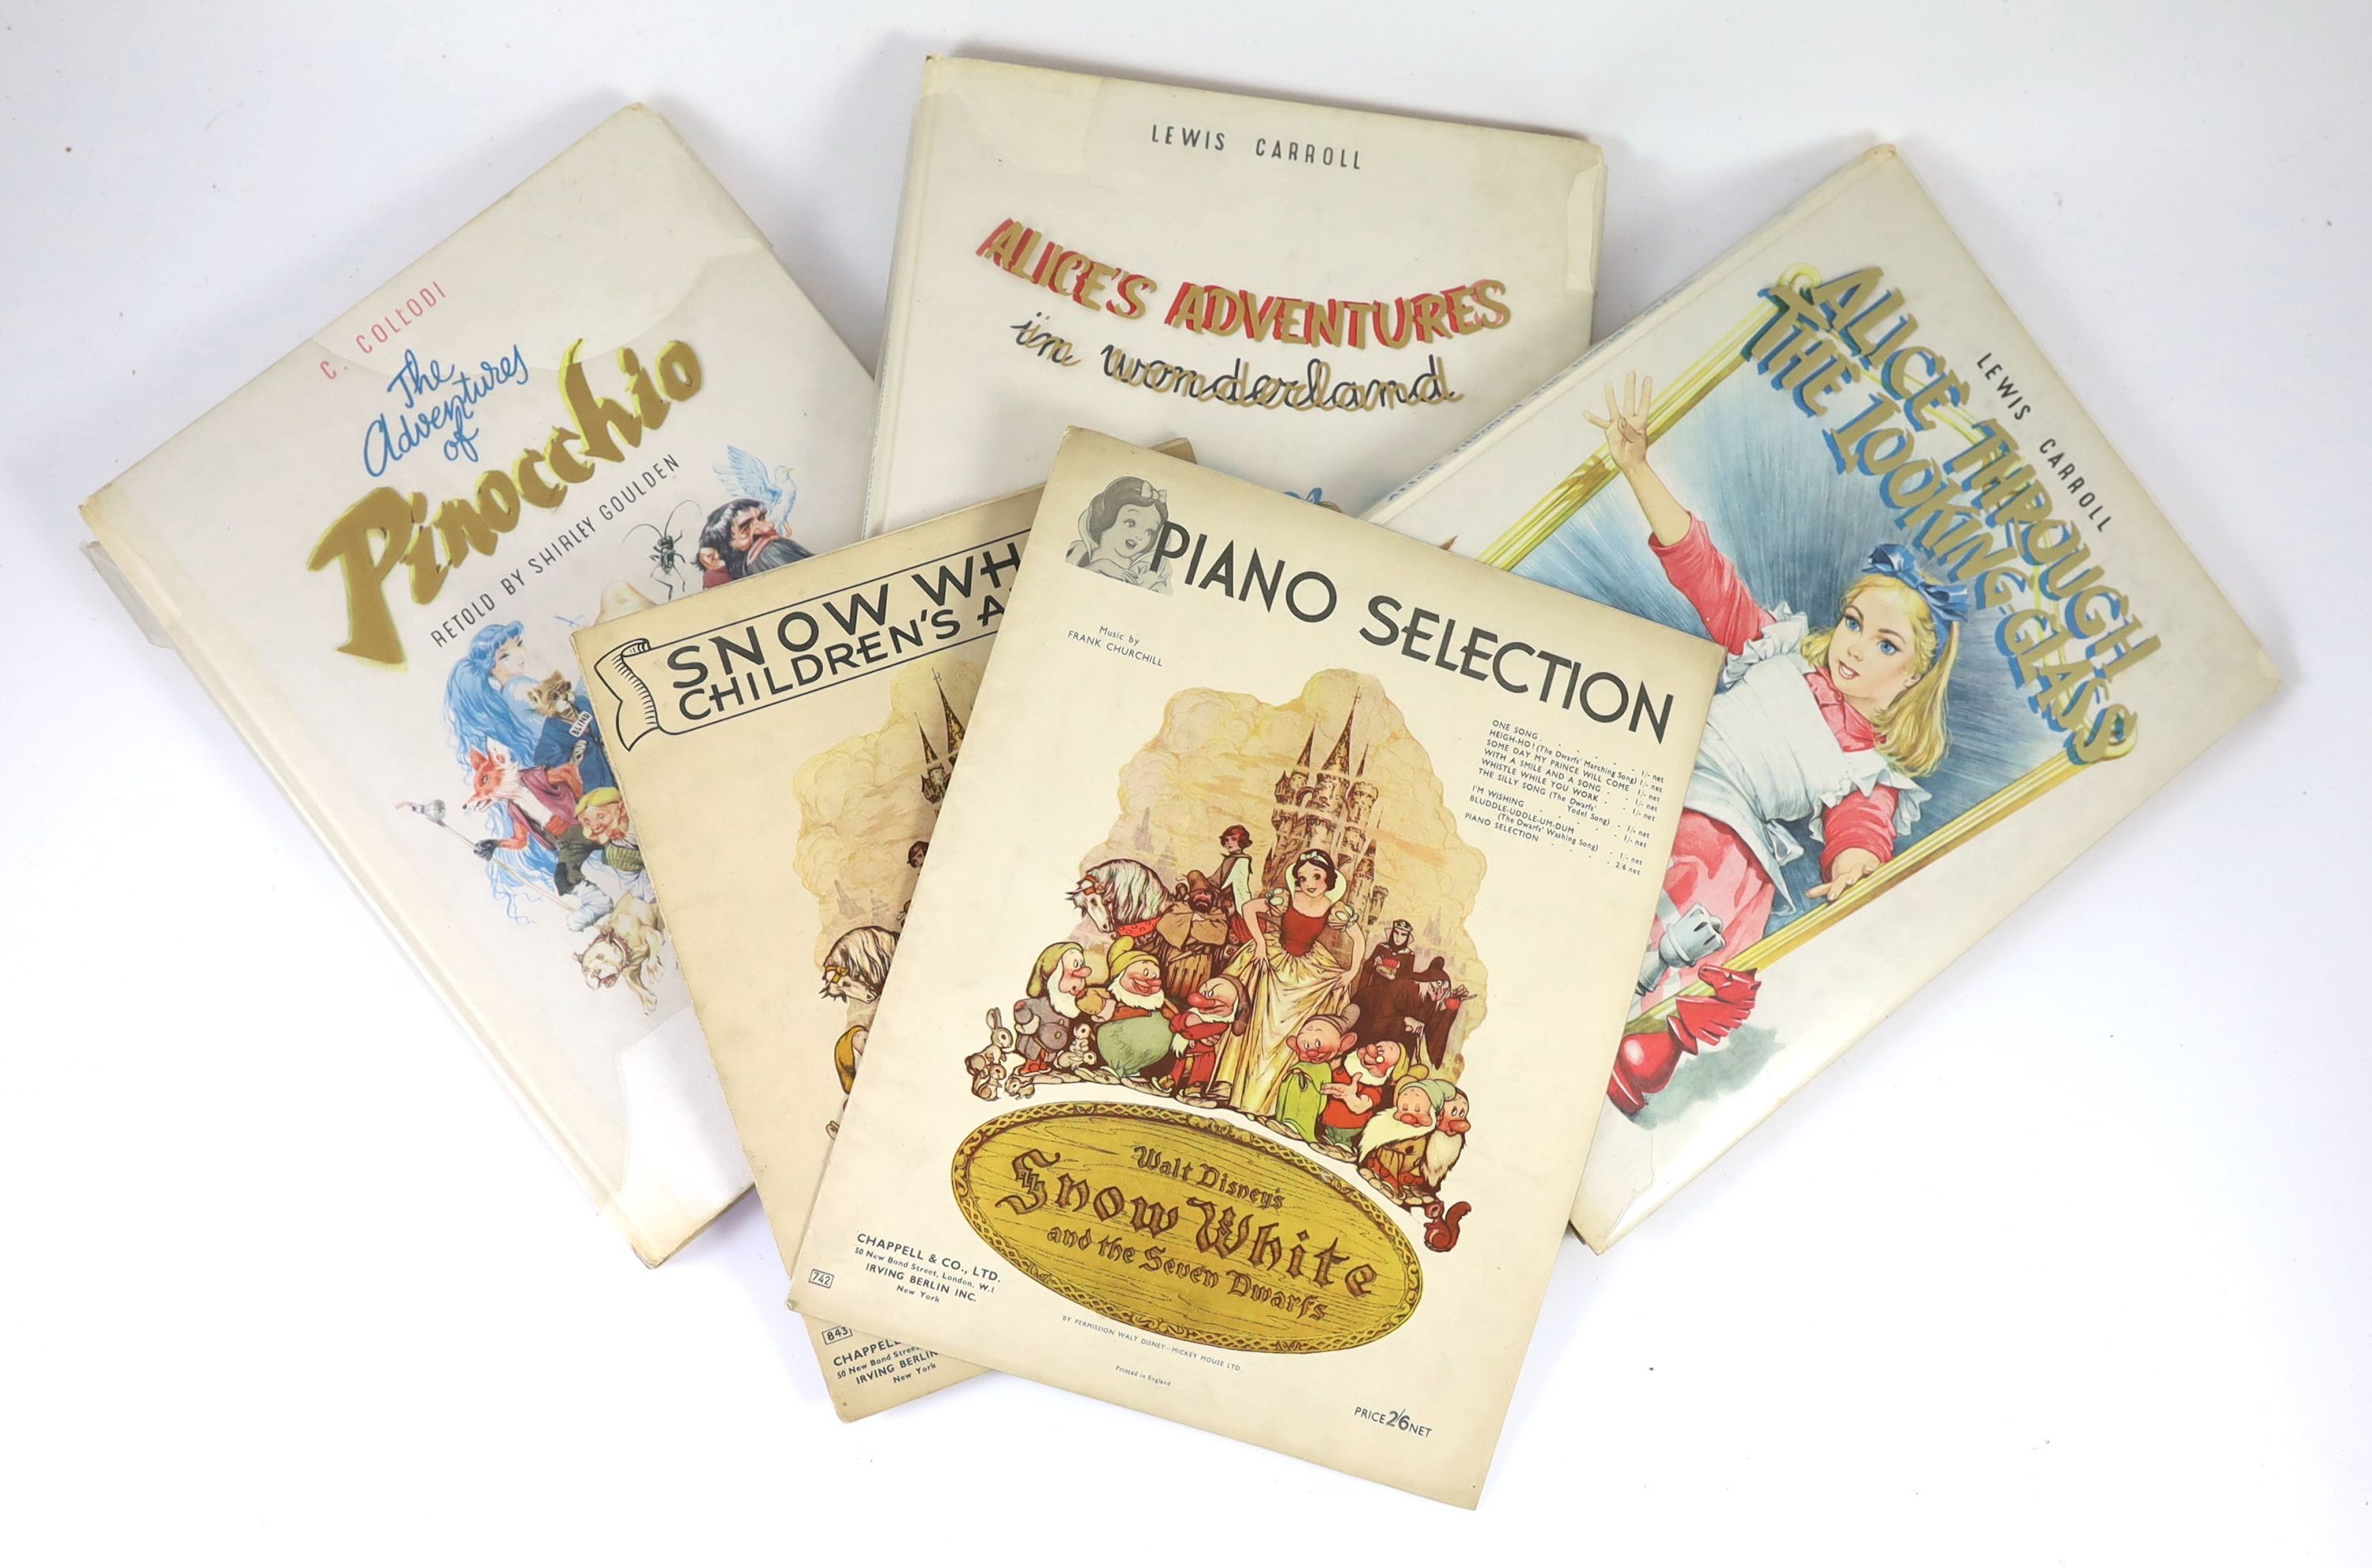 'Carroll, Lewis' - Alice's Adventures in Wonderland/Alice through the Looking Glass, 2 vols. coloured pictorial titles and coloured illus. throughout (by Maraja); publisher's coloured pictorial boards and glassine wrappe